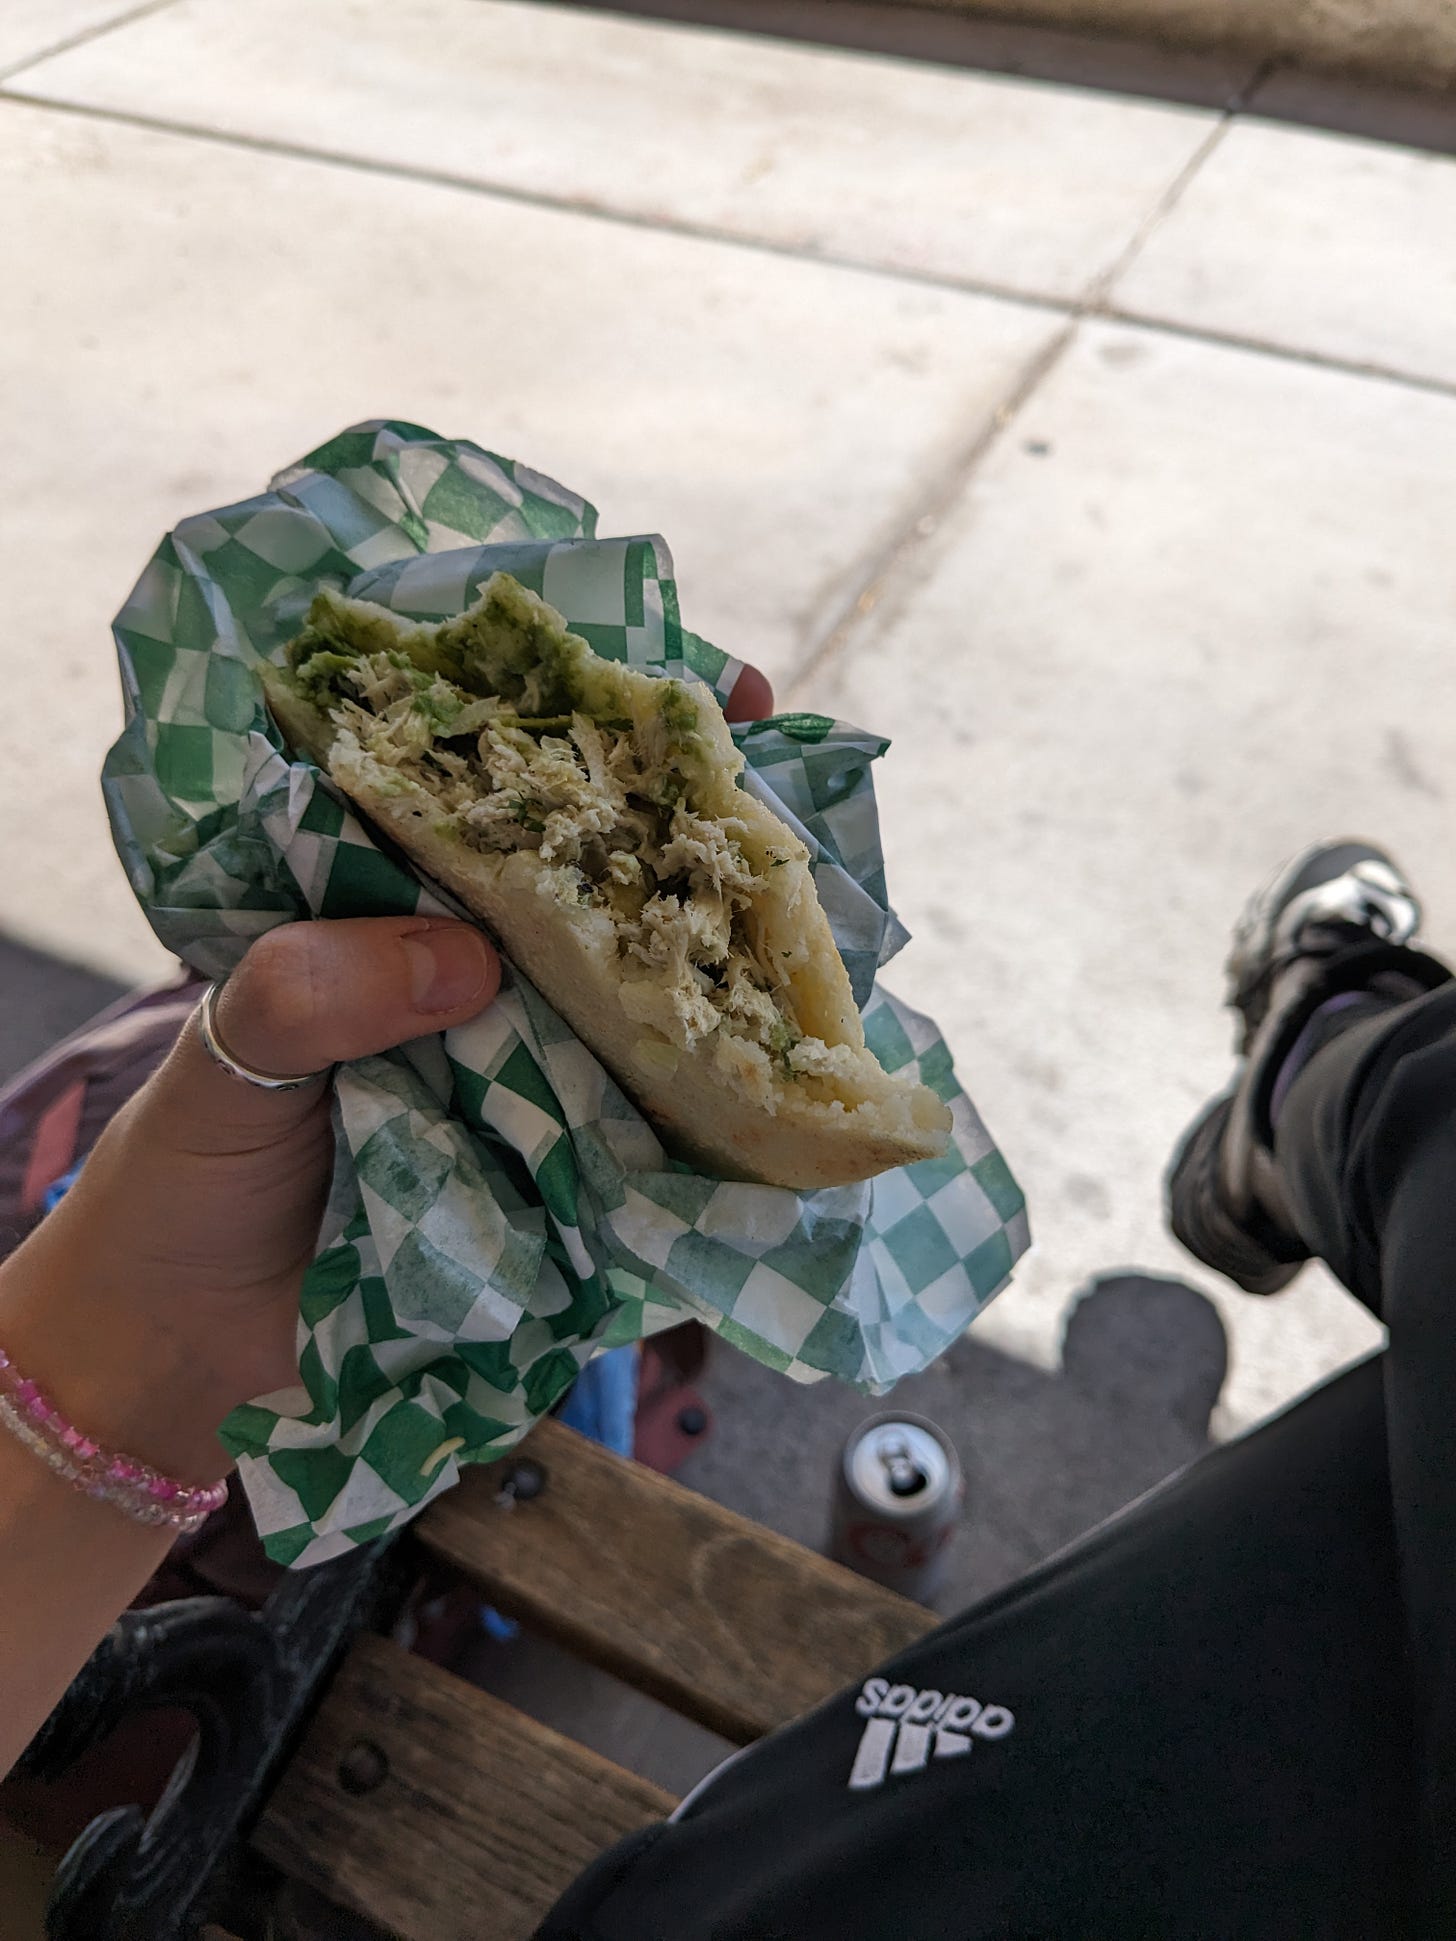 The best arepa I have ever eaten, here in my meaty claw on a bench.